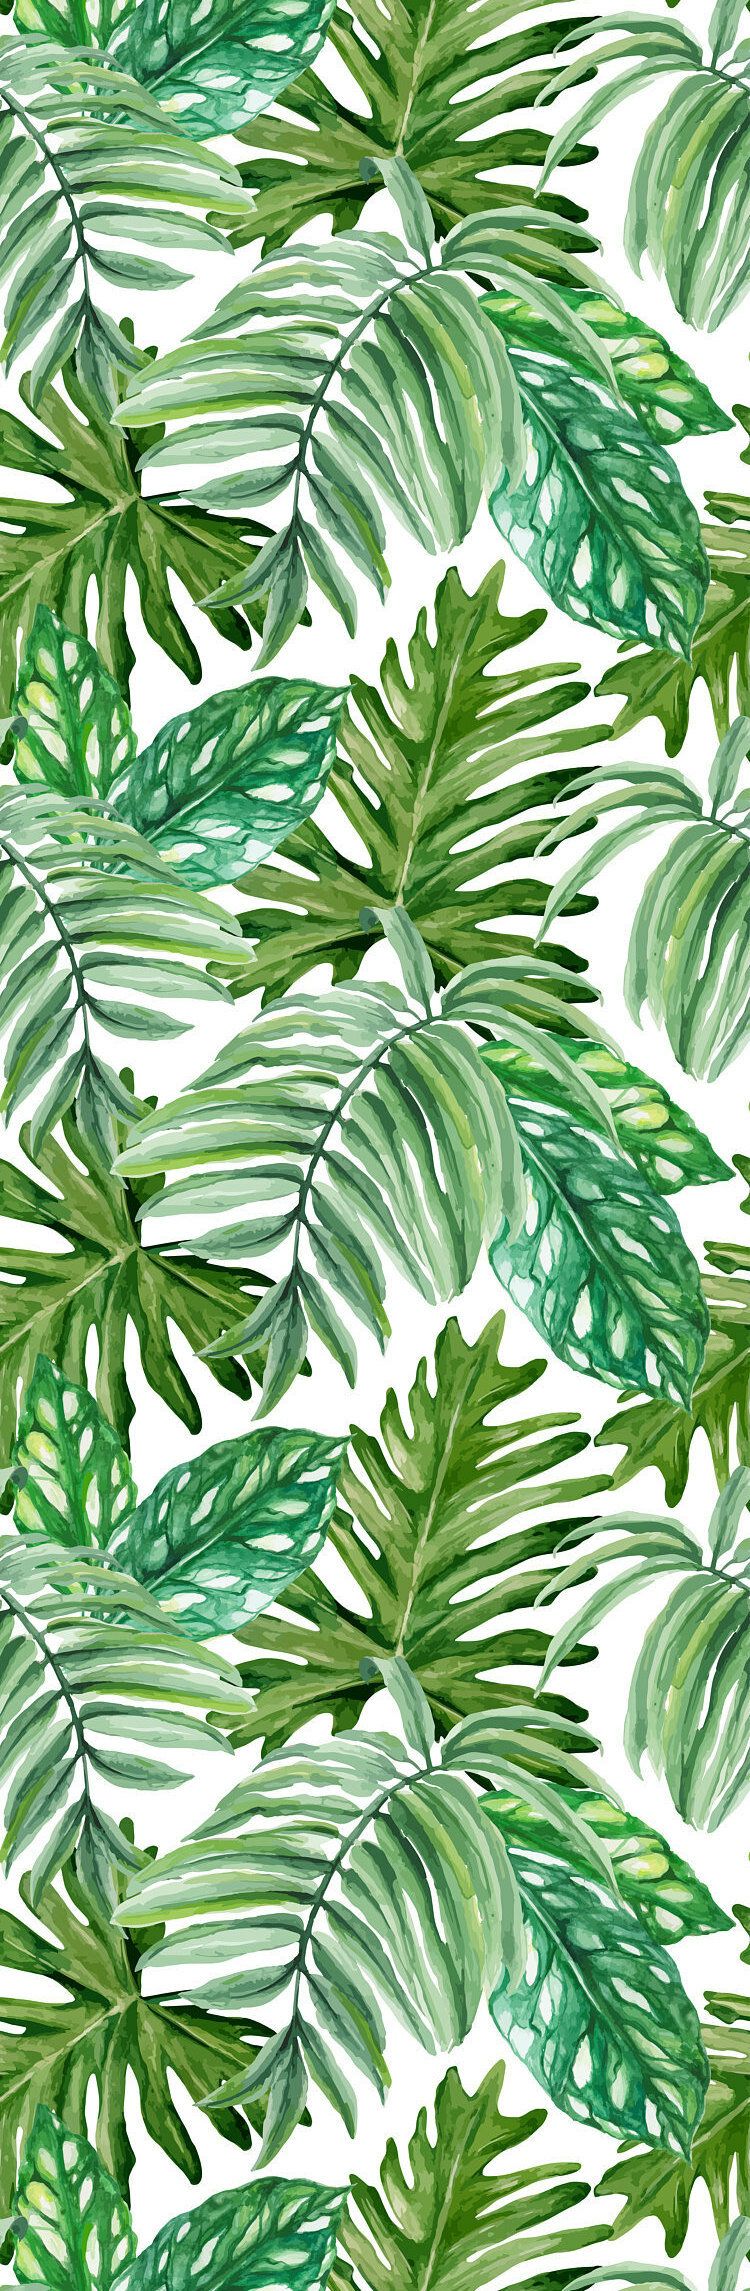 Bay Isle Home Alviso Removable Exotic Monstera Leaves Rainforest 6.25' L x 25 W Peel and Stick Wallpaper Roll